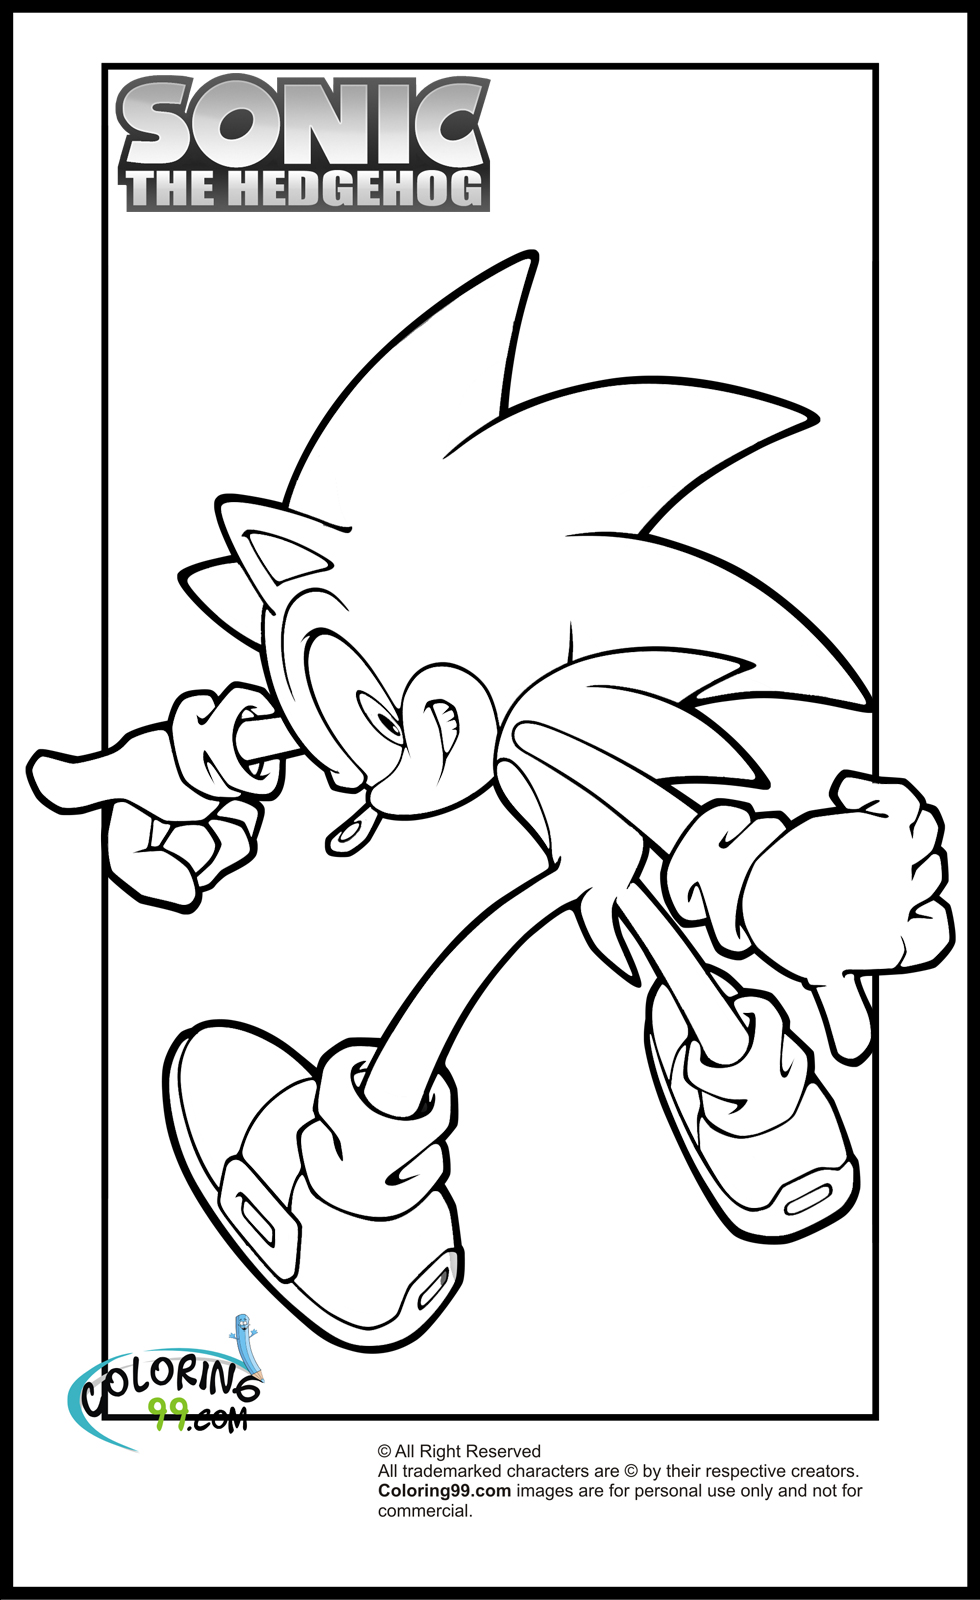  Sonic coloring pages | disney coloring pages for kids | color pages | coloring pages to print | kids coloring pages | #22